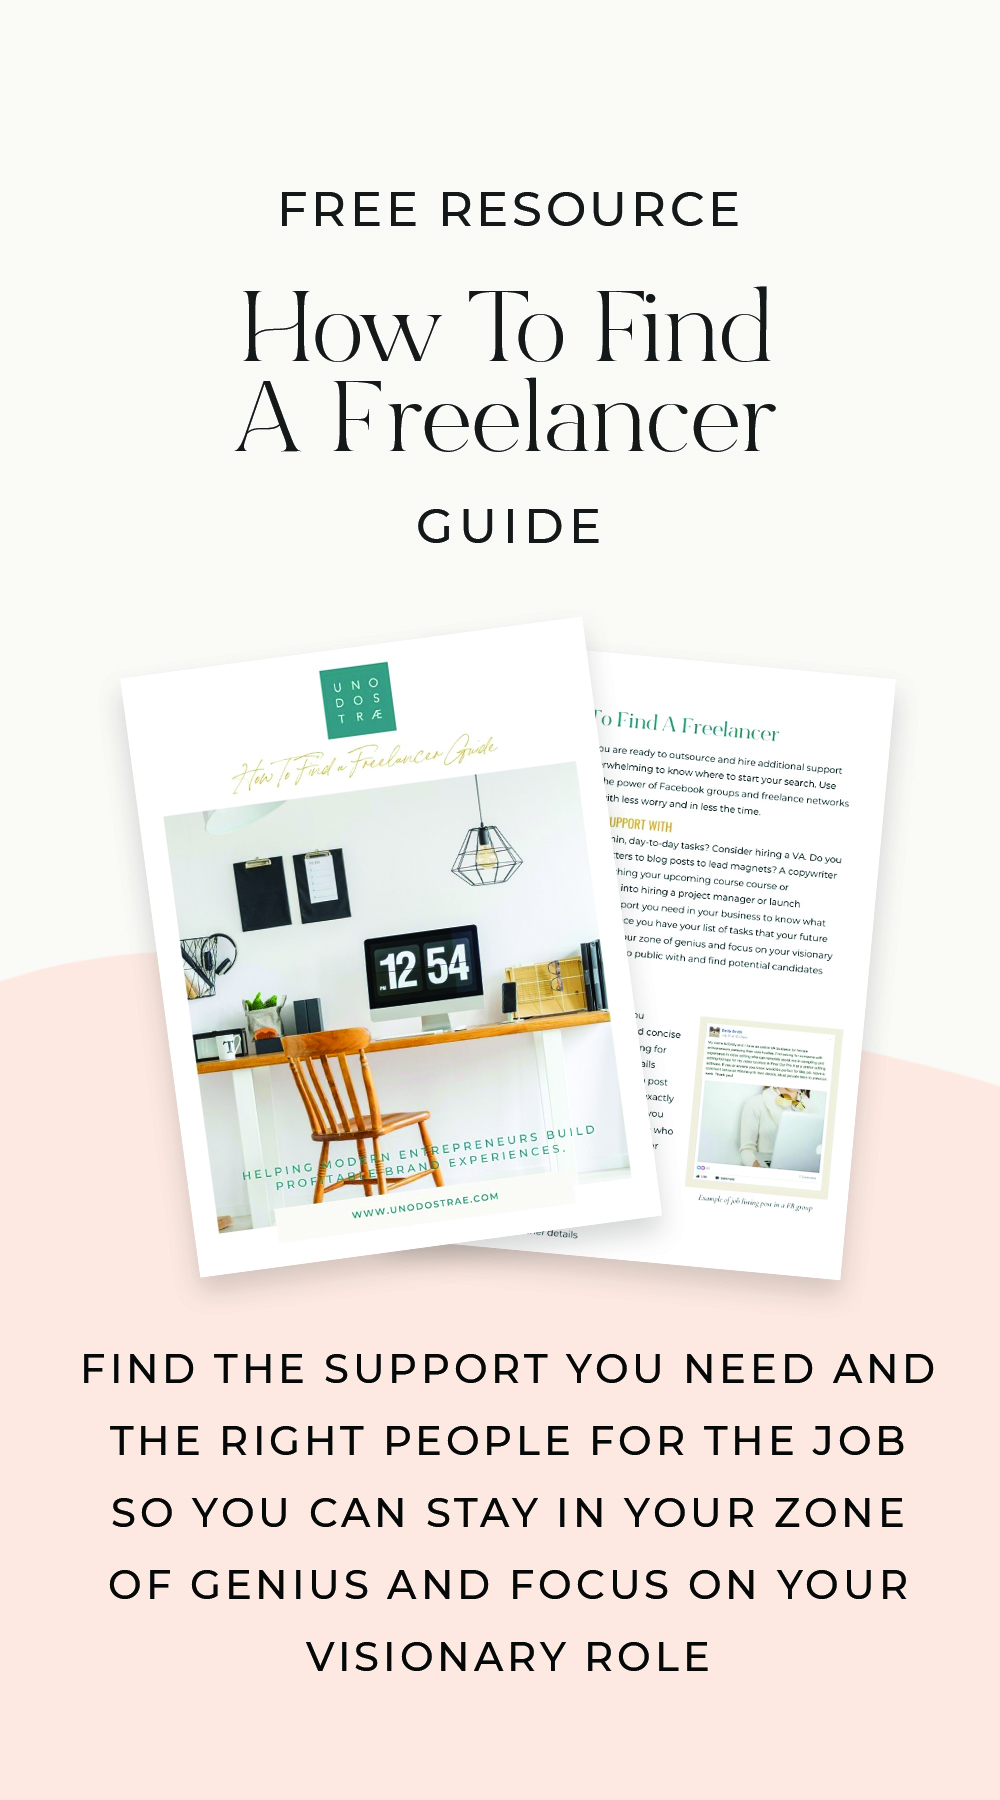 Downnload the How To Find A Freelancer-Guide | Uno Dos Trae